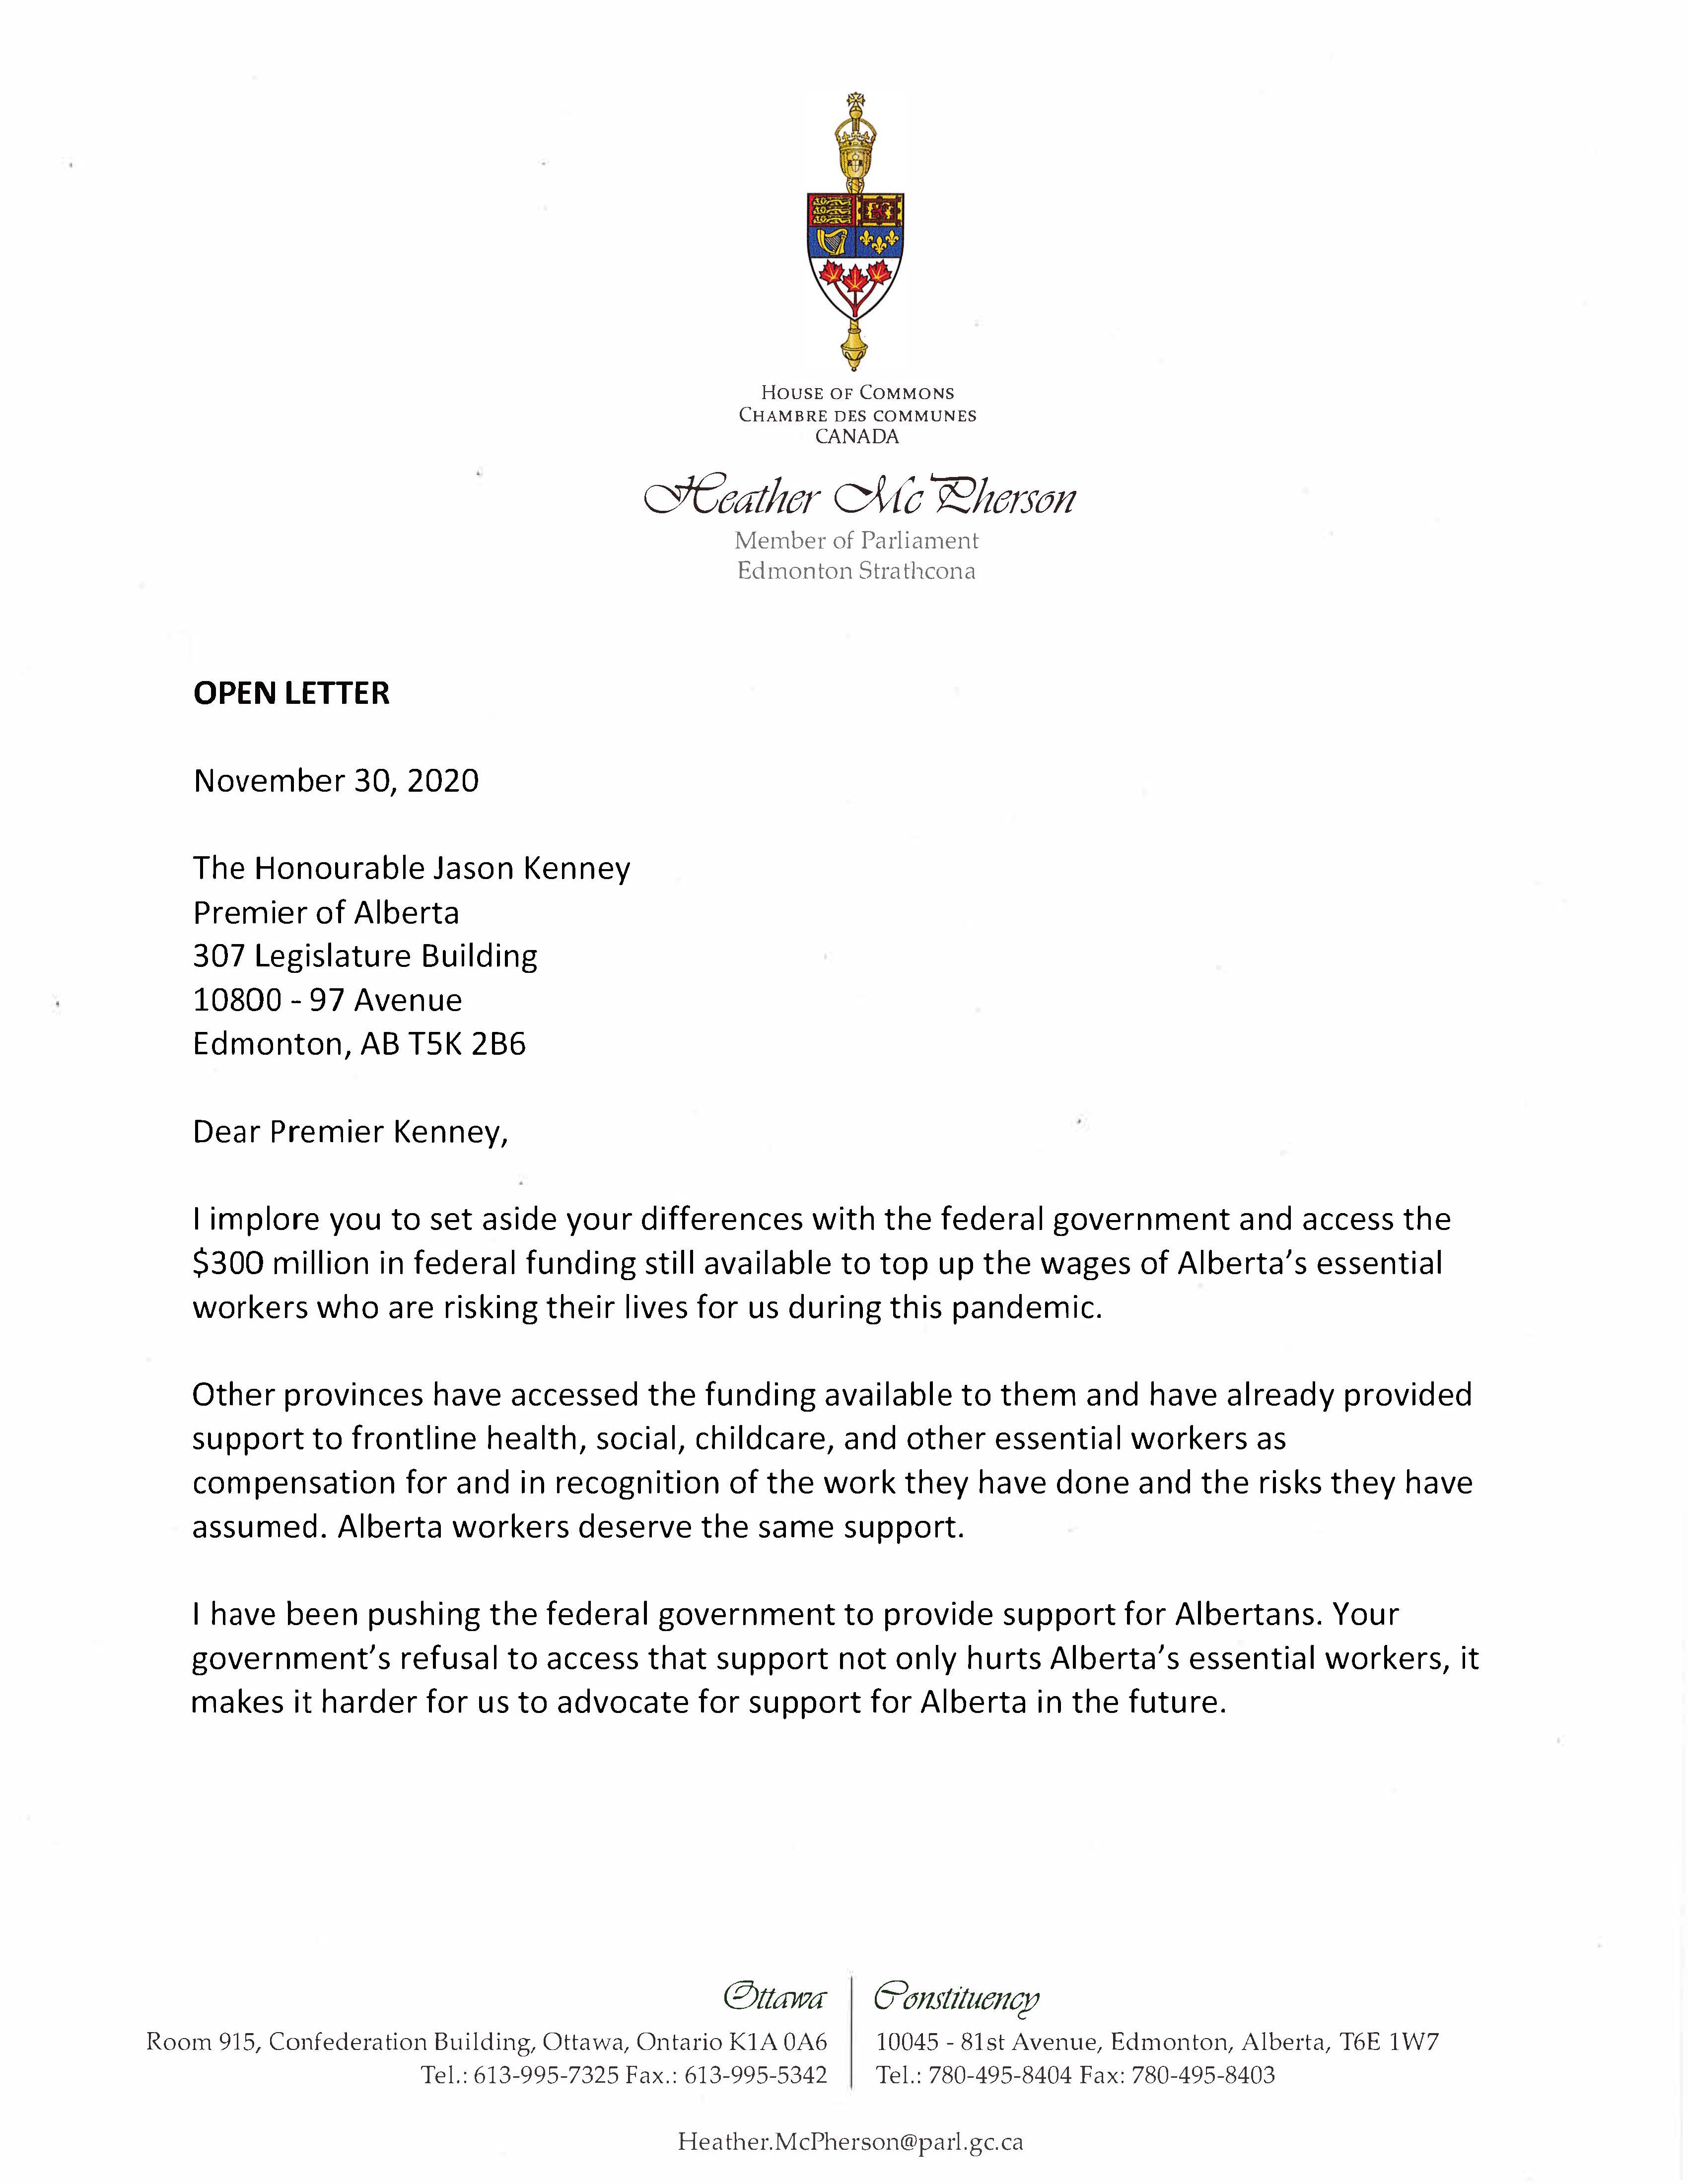 Letter to Premier Kenney Page 1